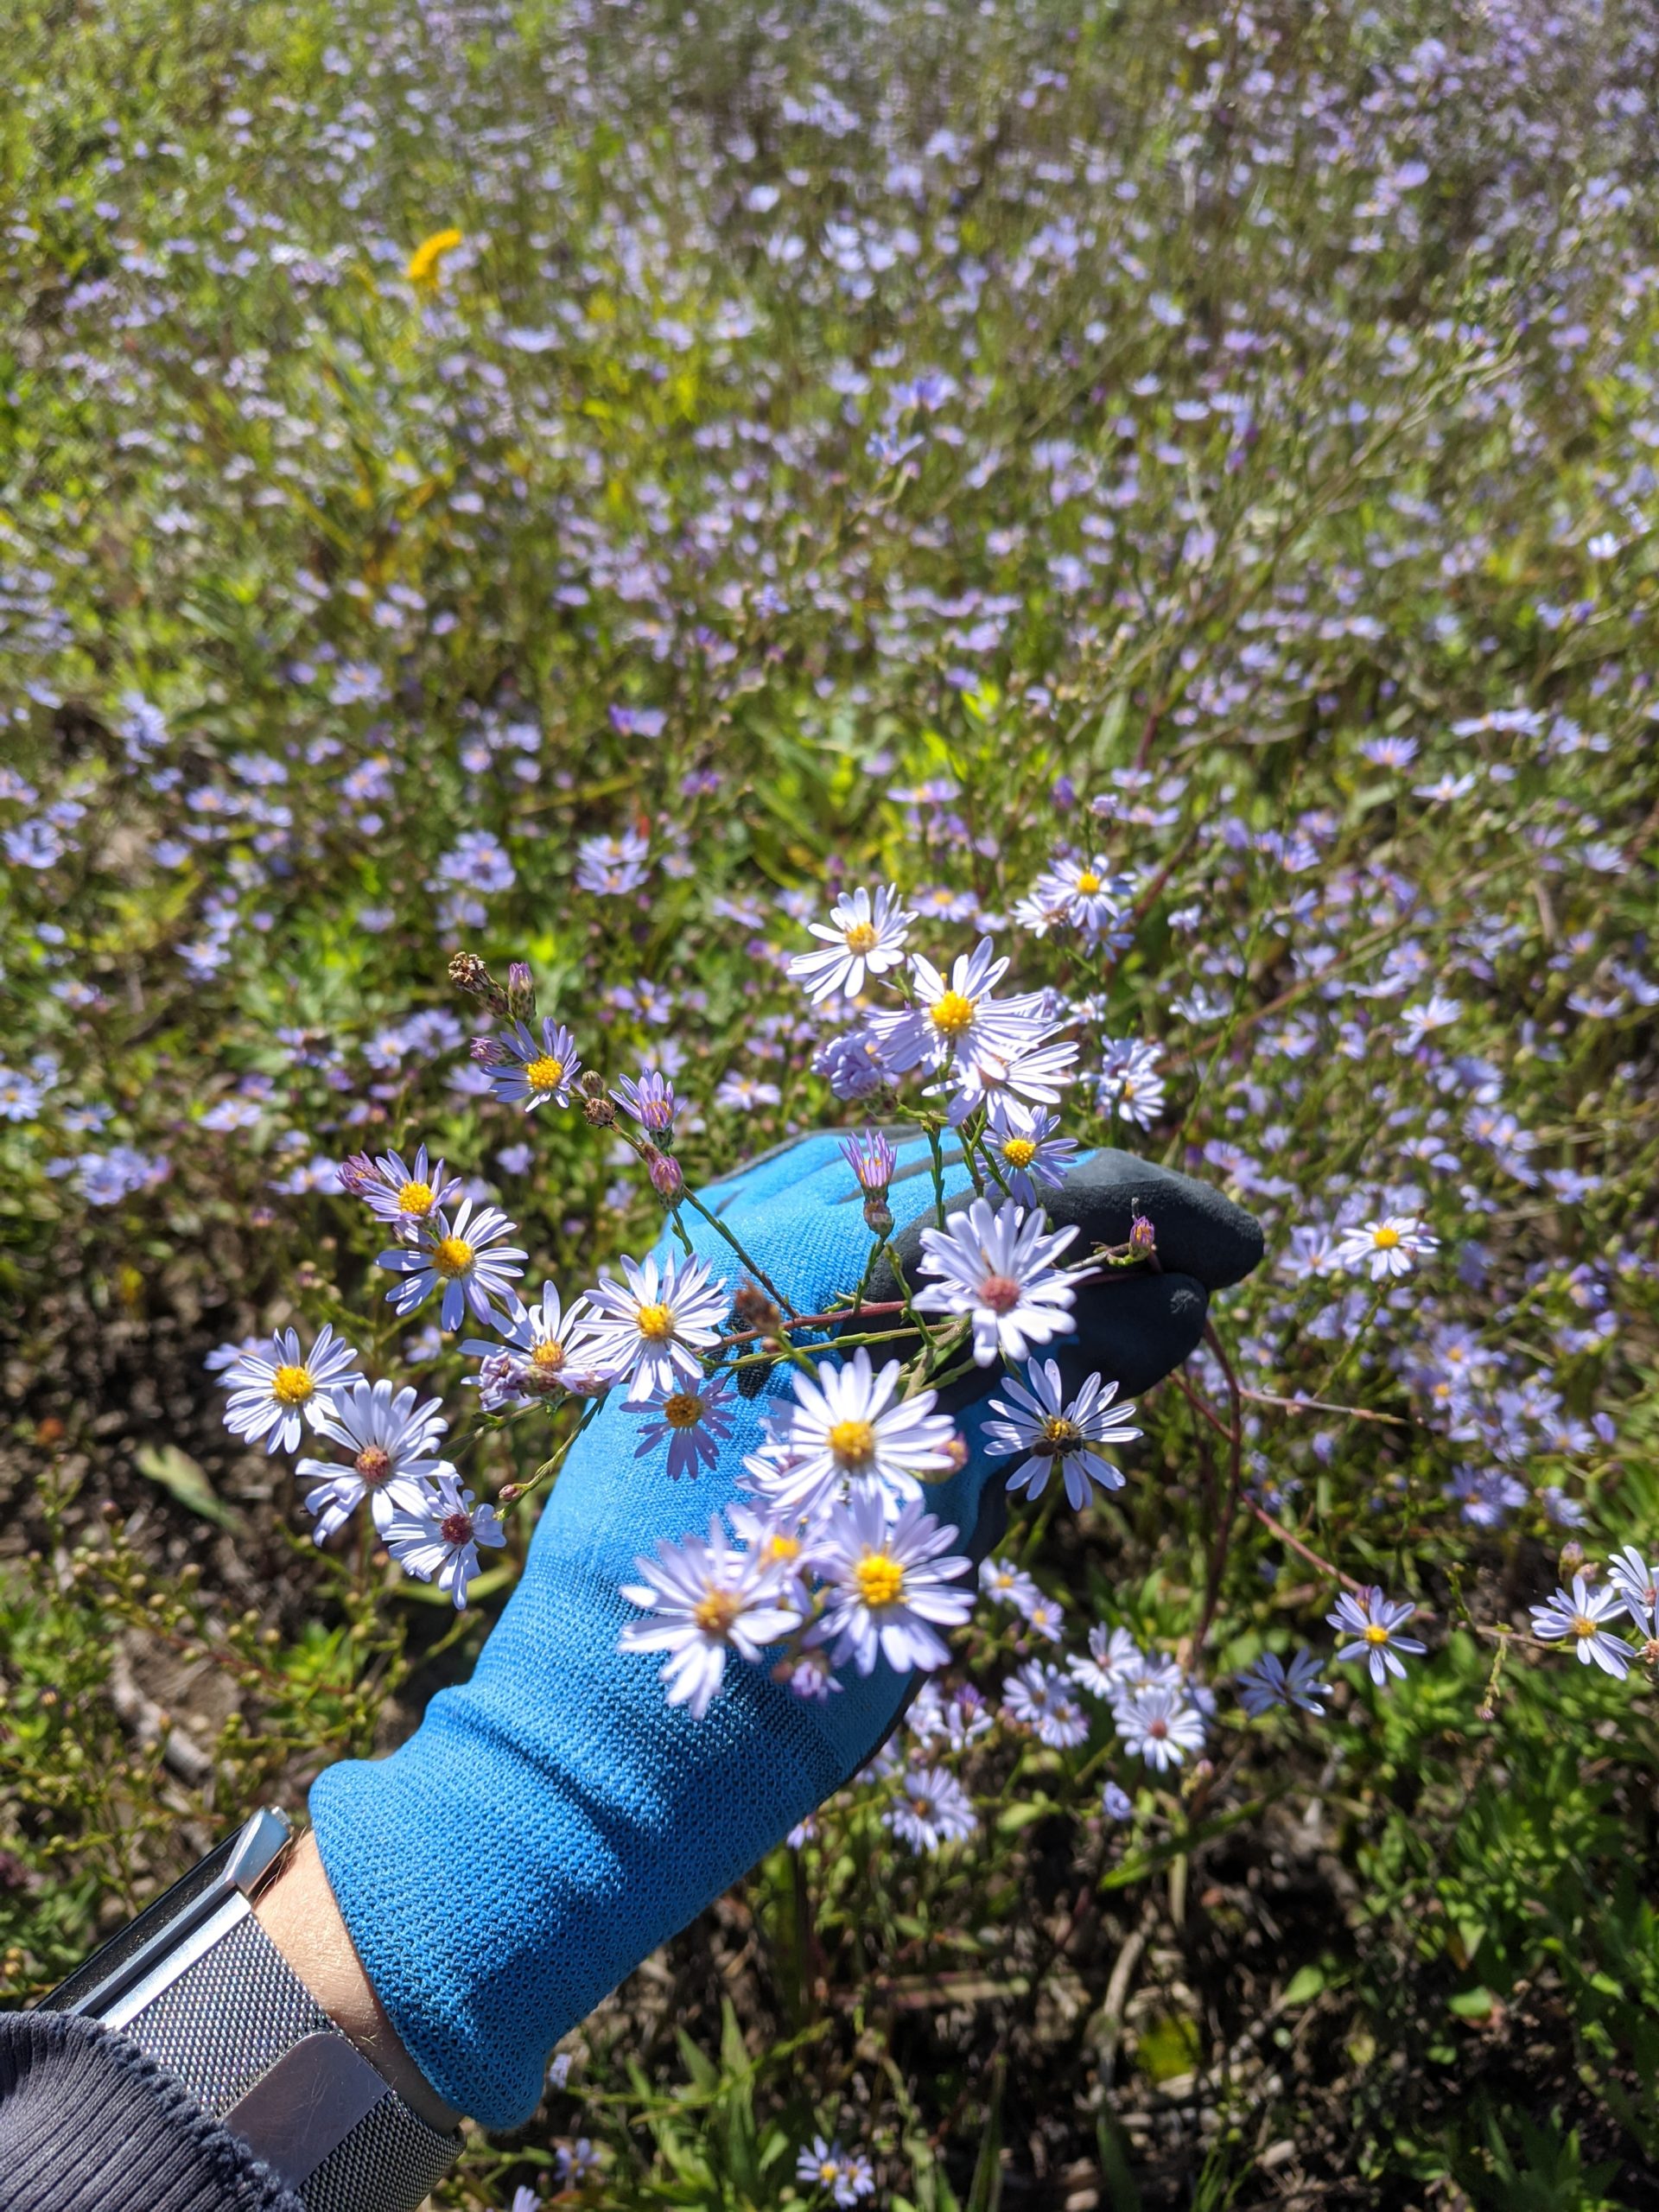 Sky Blue Aster blooms held by a gloved hand